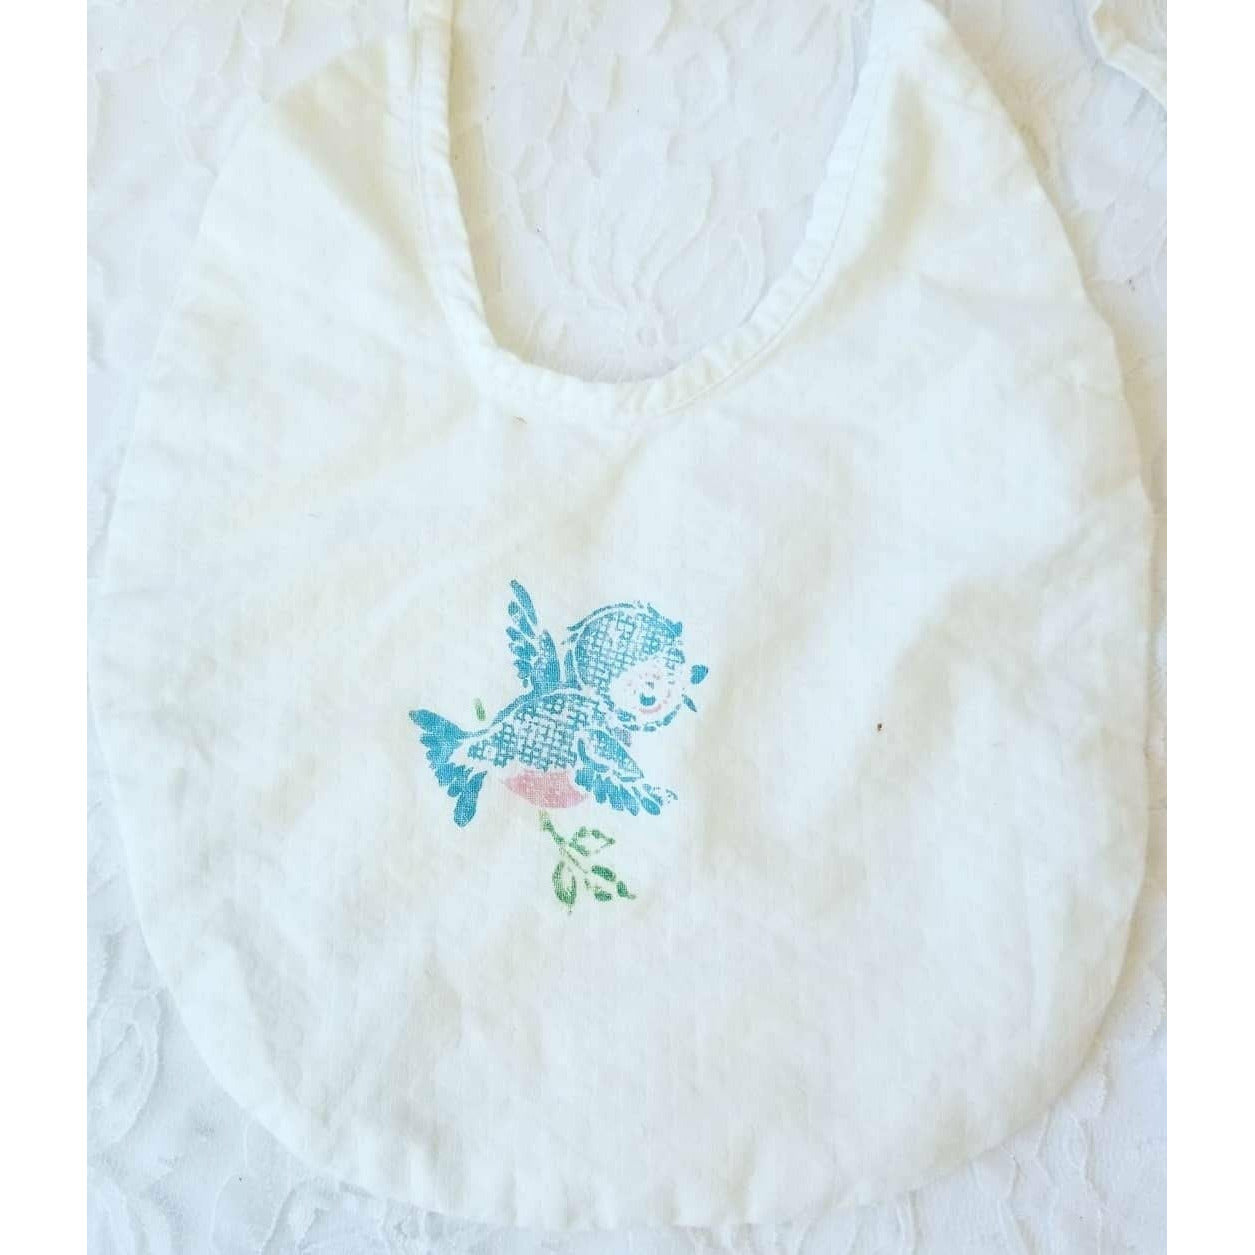 Vintage Baby Seersucker Bib and Bonnet ~ Handmade 1940s with Painted Bluebird and Embroidery